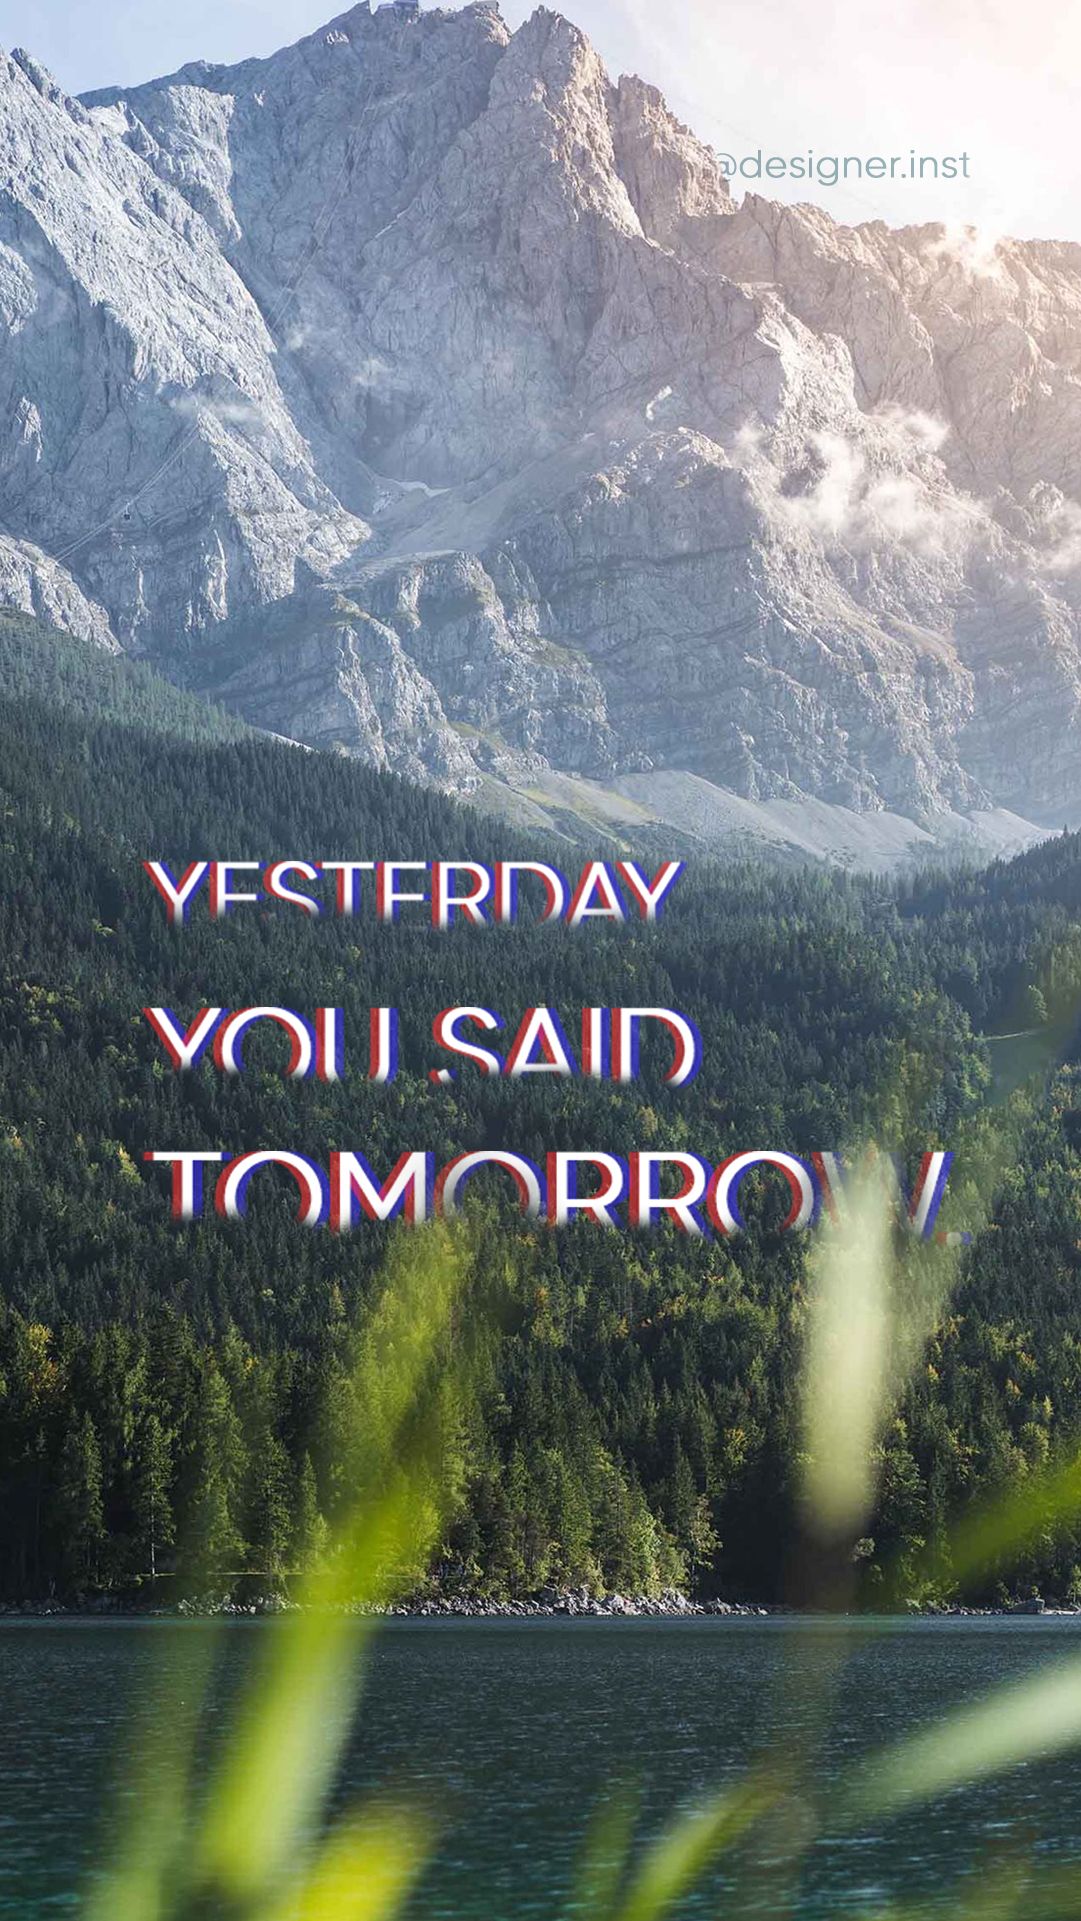 Yesterday you said tomorrow Wallpaper iPhone. Motivational wallpaper, Motivational wallpaper iphone, iPhone wallpaper